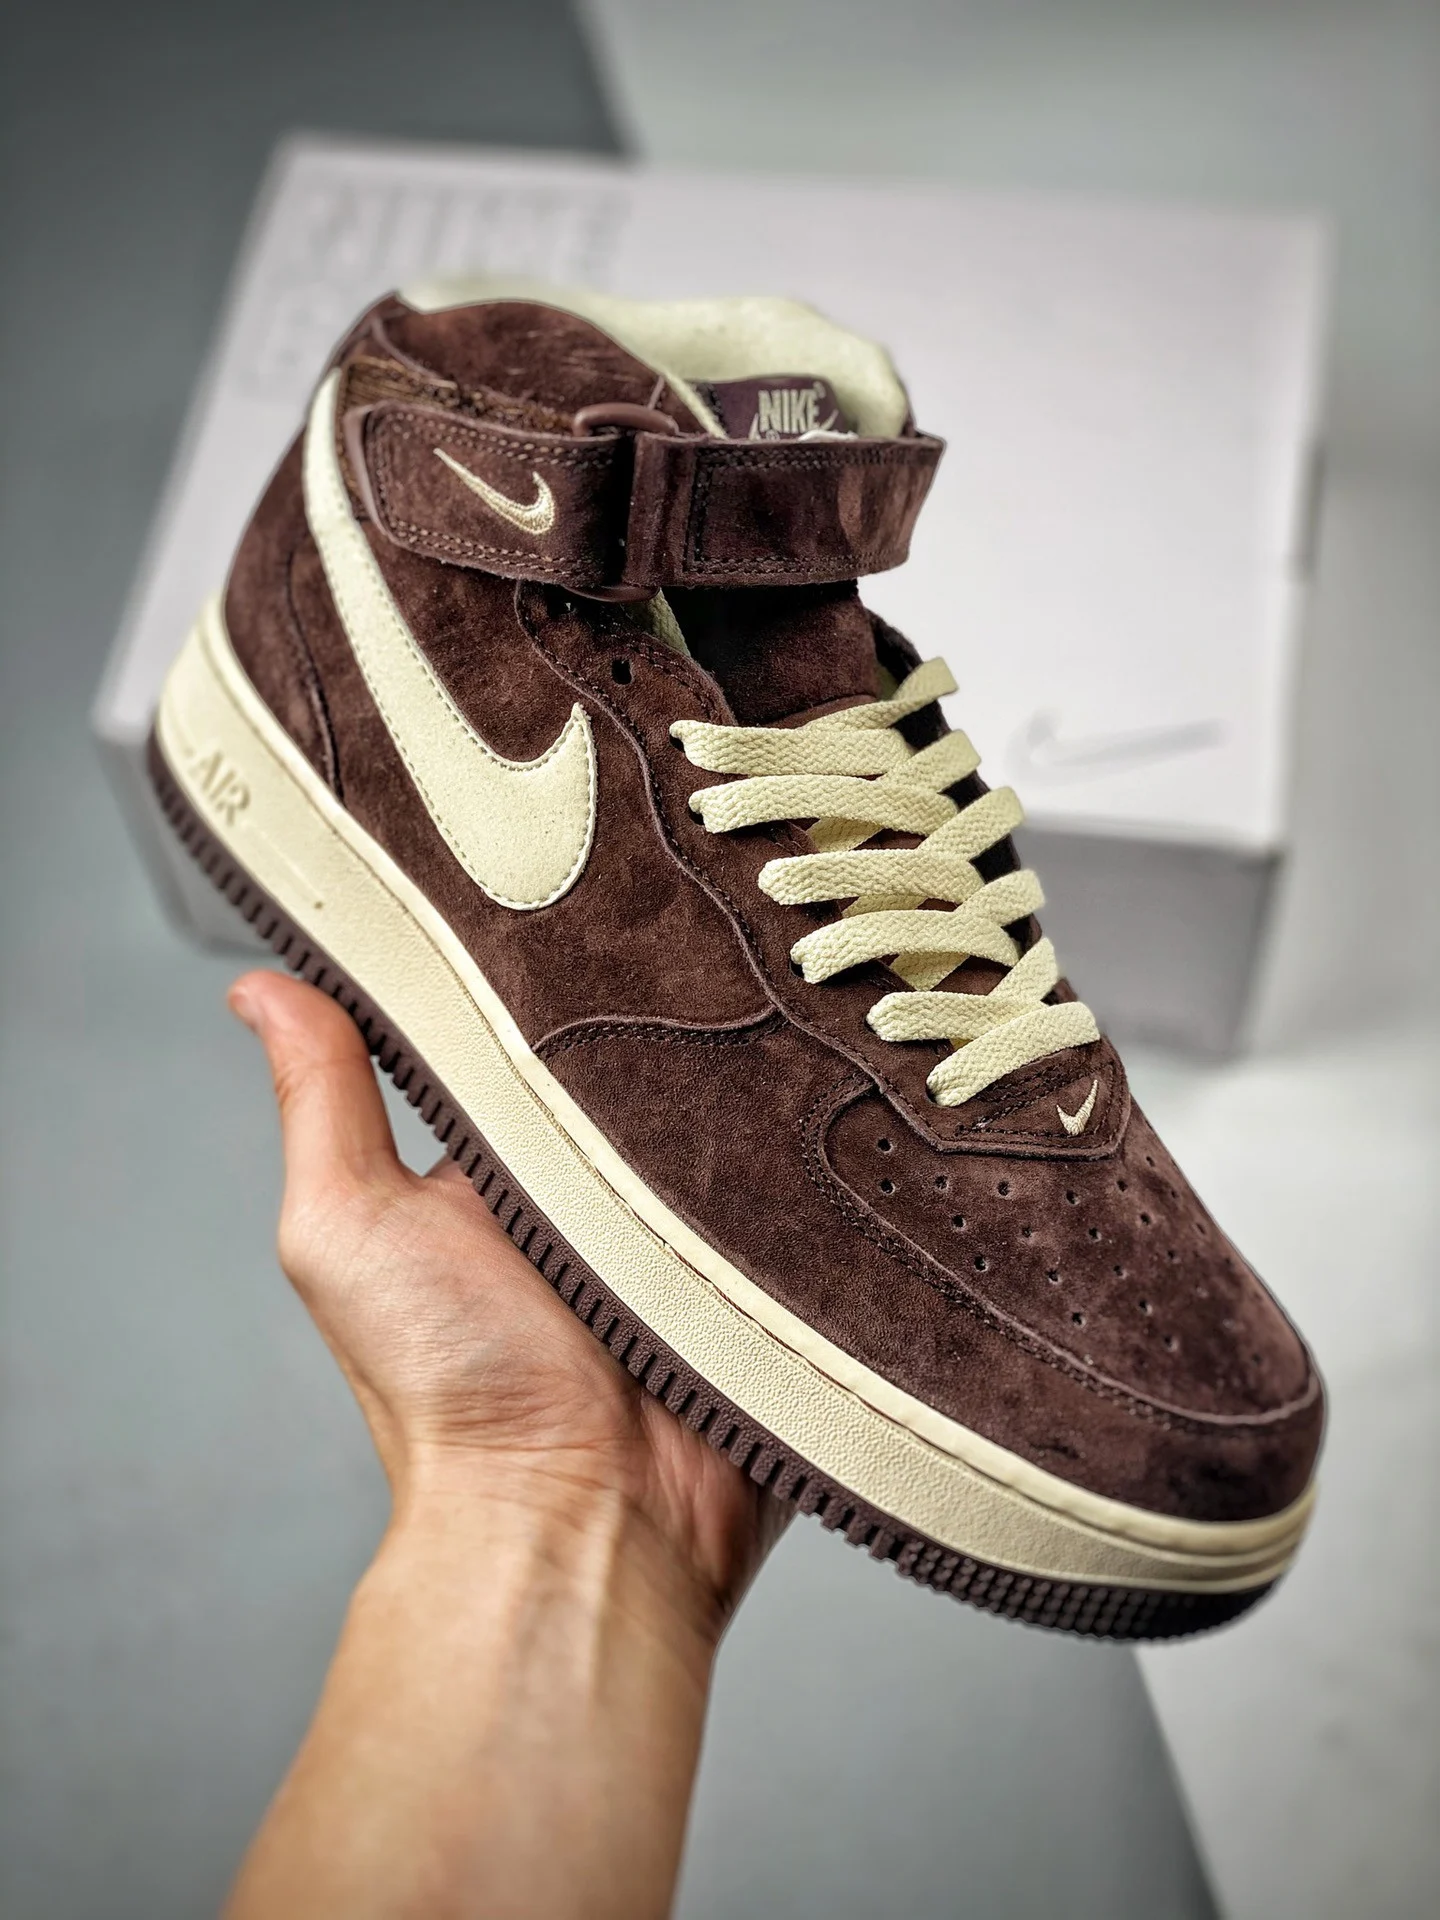 Nike Air Force 1 Mid QS Chocolate DM0107-200 For Sale